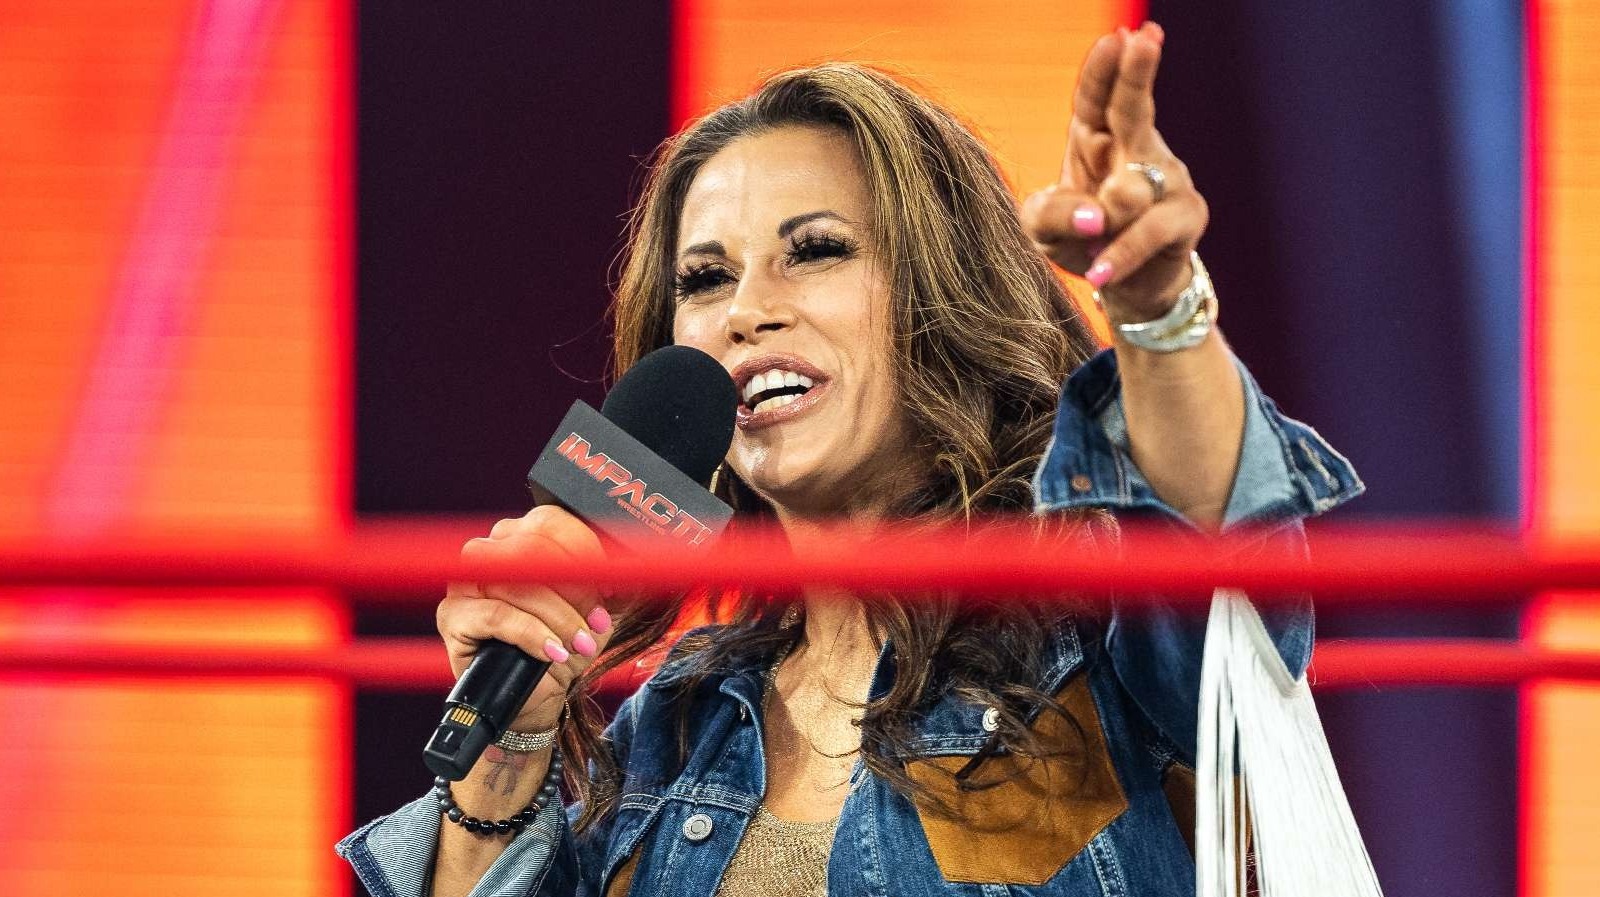 Wwe Diva Mickie James Pussy - Mickie James Makes Out With Knockout During Match On Impact